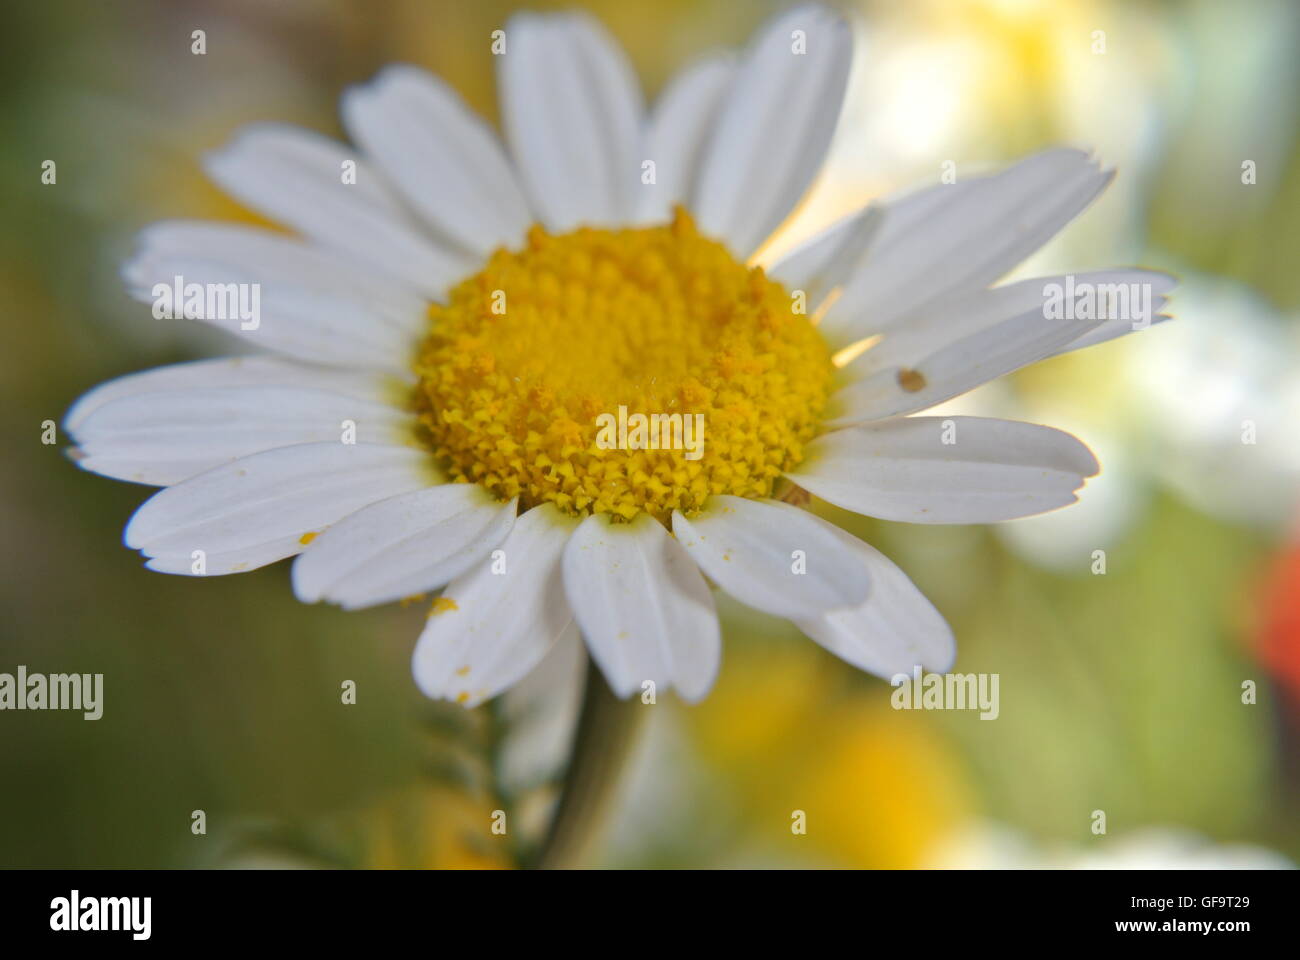 A close-up of a blooming daisy Stock Photo